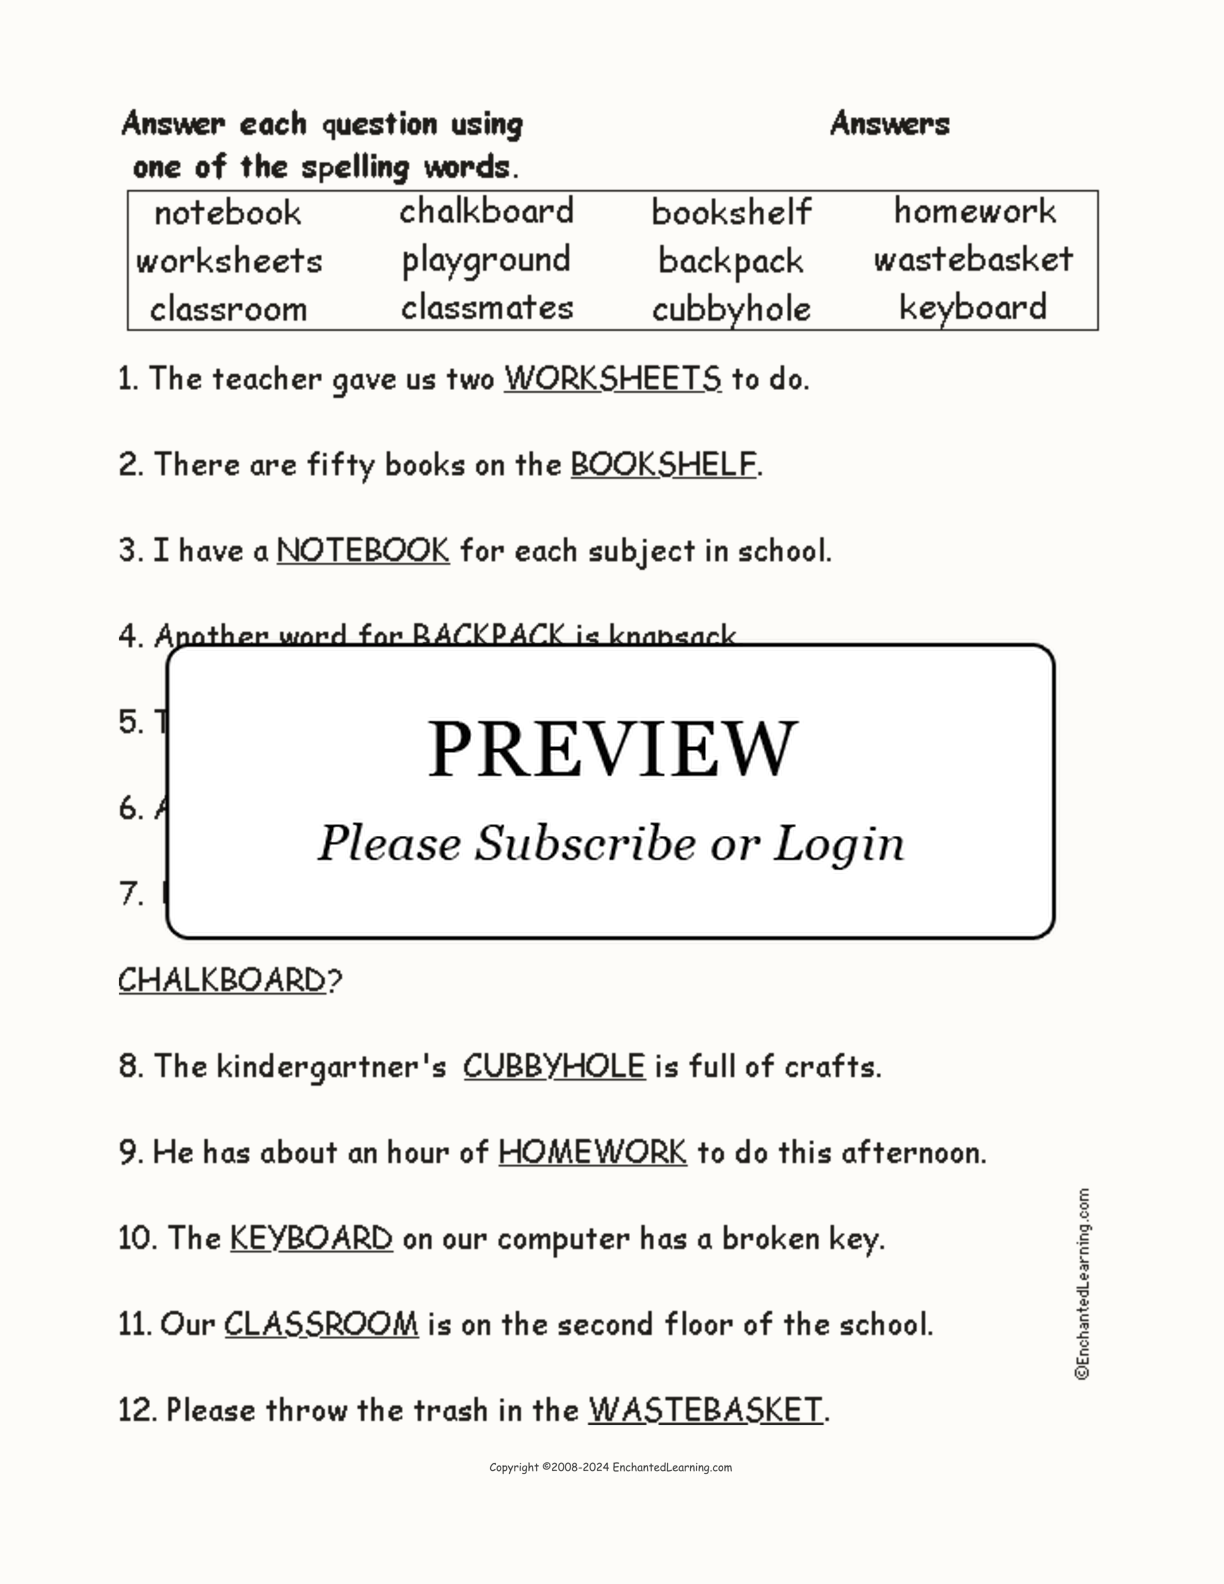 Compound School Spelling Word Questions interactive worksheet page 2